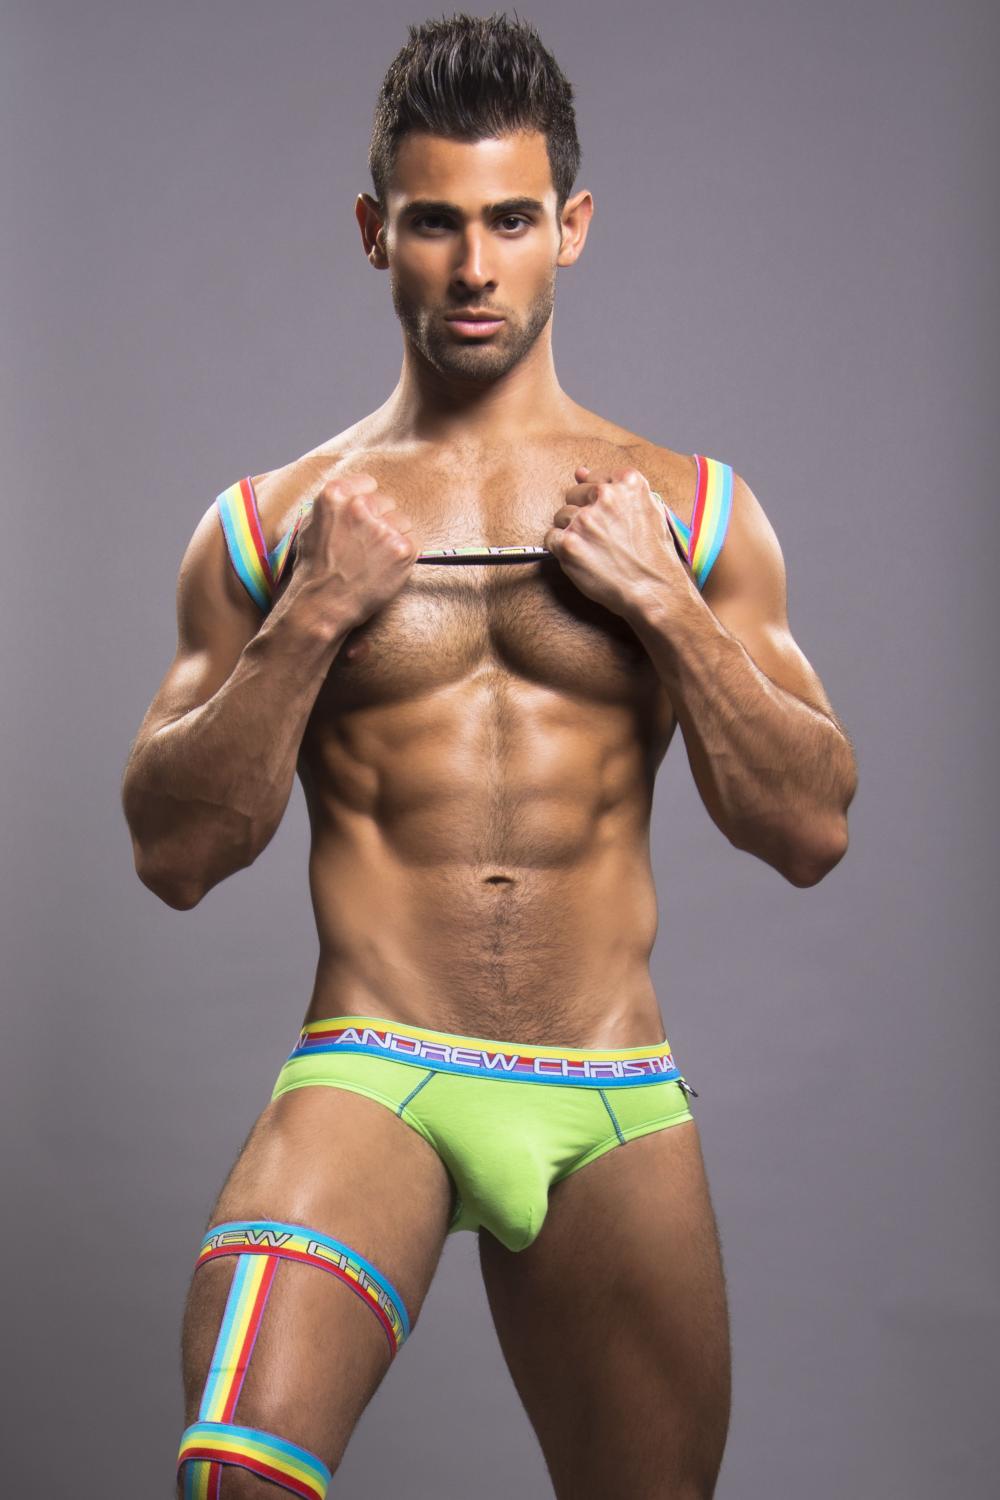 Bold and beautiful: andrew christian models go completely nude